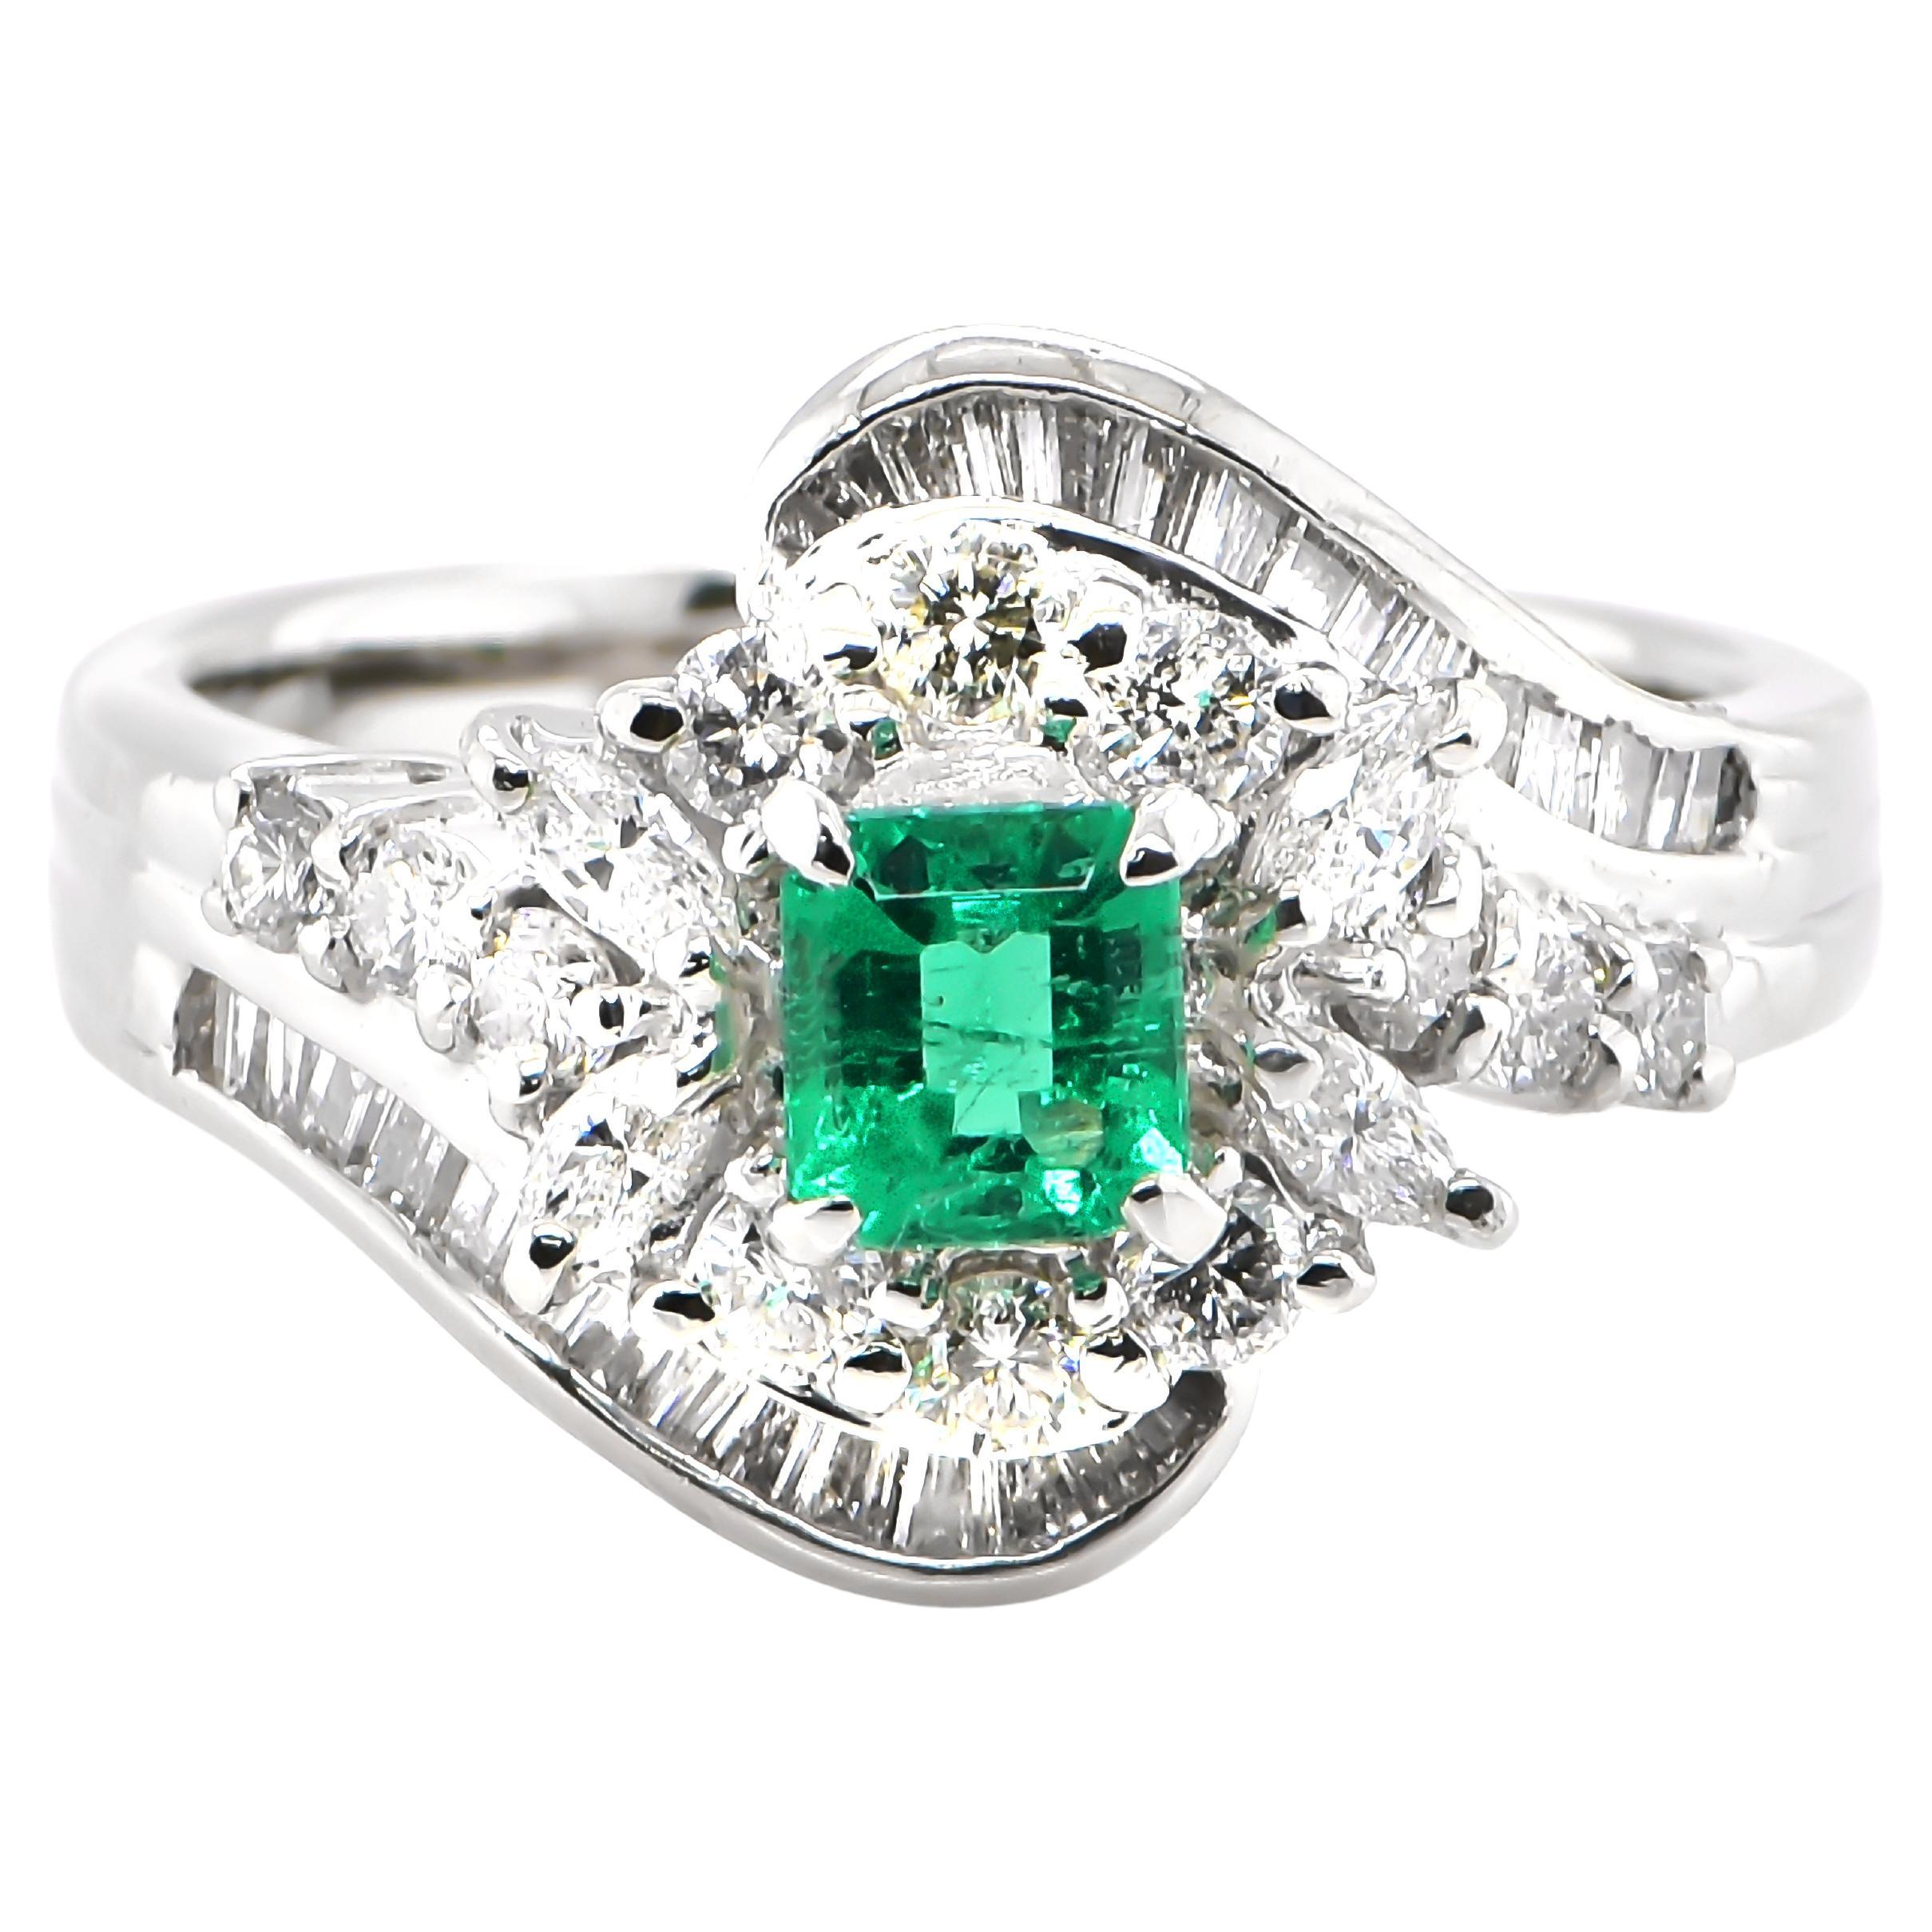 0.42 Carat Natural Vivid Green Emerald & Diamond Cocktail Ring Made in Platinum For Sale